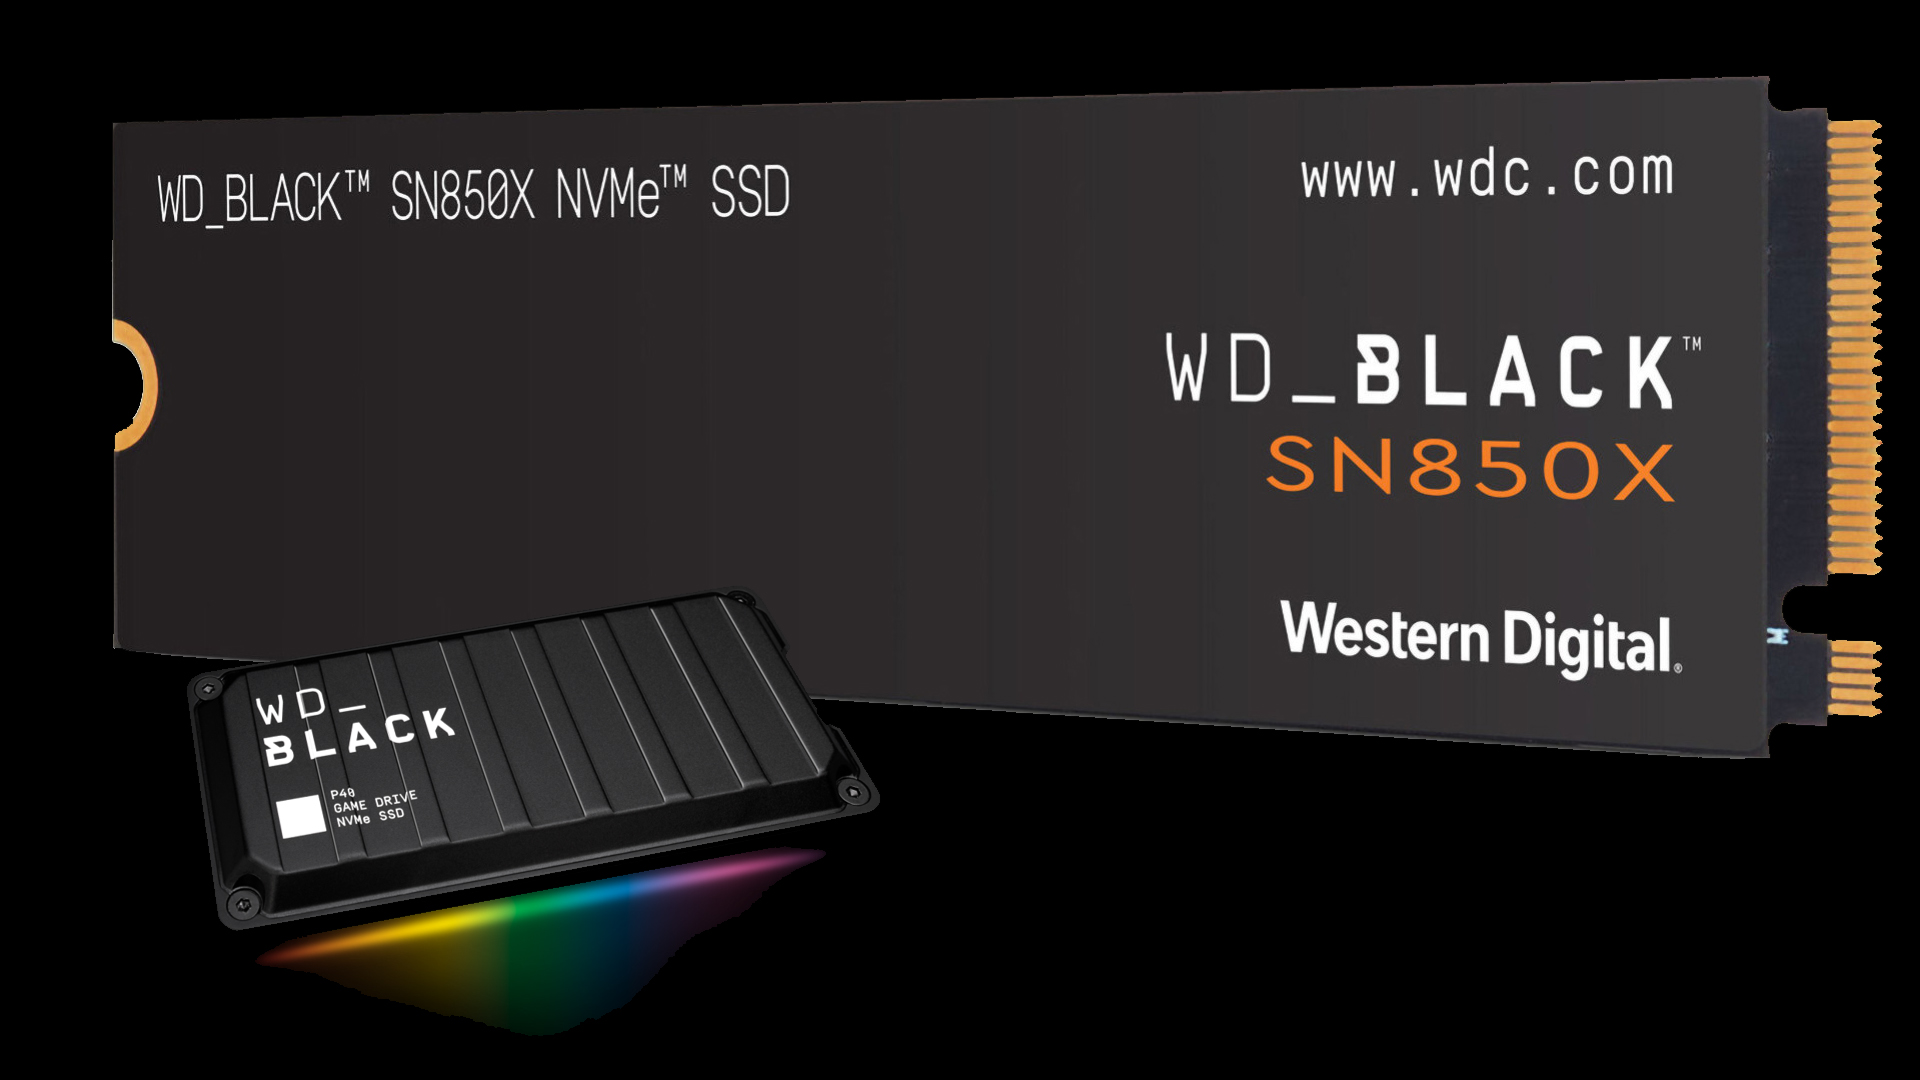 Western Digital announces WD Black SN850X NVMe SSD and more gamer-centric storage devices | GamesRadar+